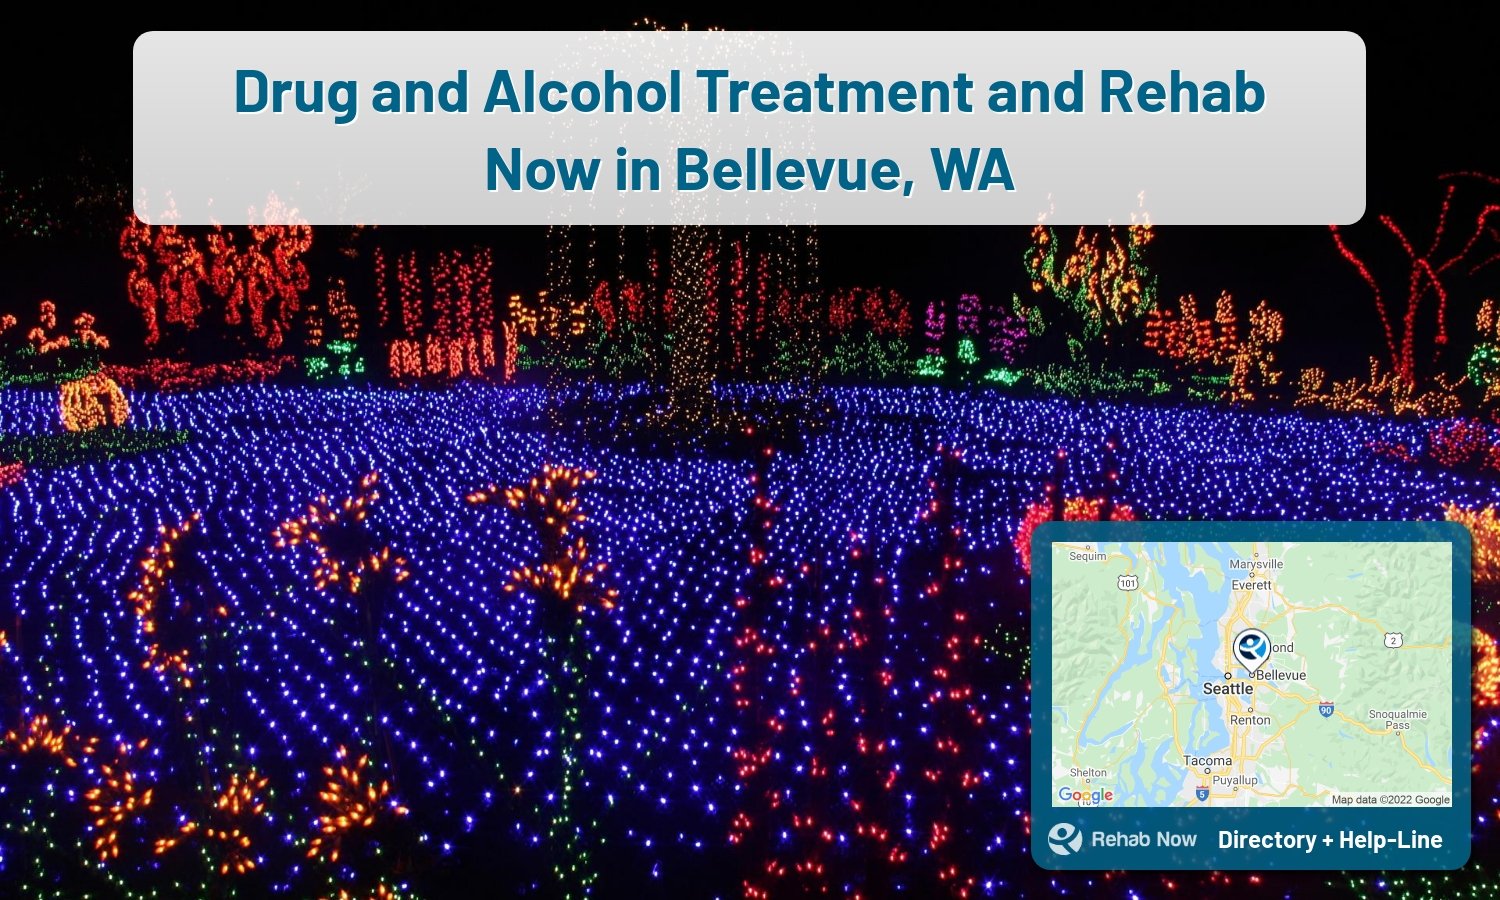 Our experts can help you find treatment now in Bellevue, Washington. We list drug rehab and alcohol centers in Washington.